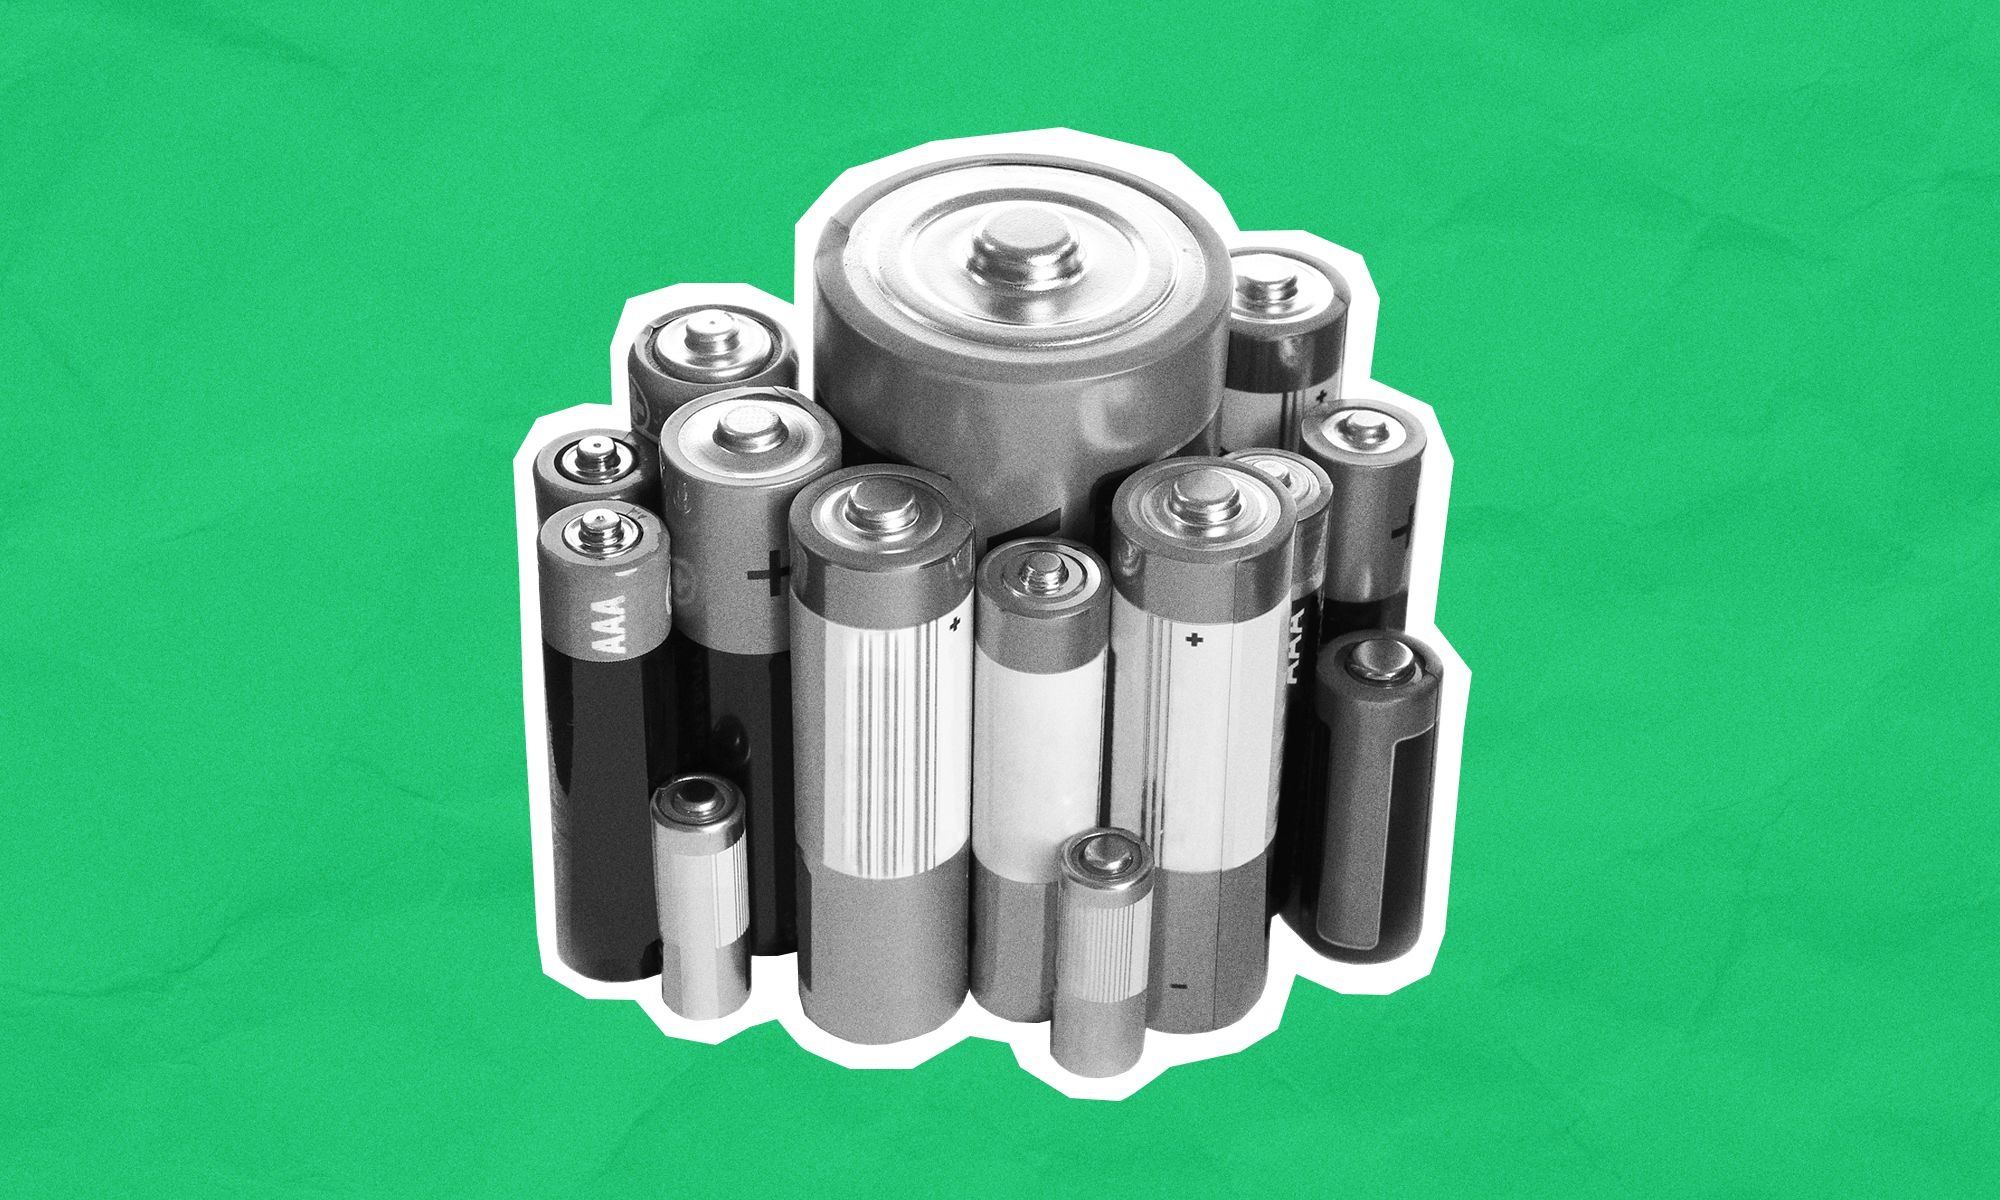 A collection of batteries of various shapes and sizes all bunched together.